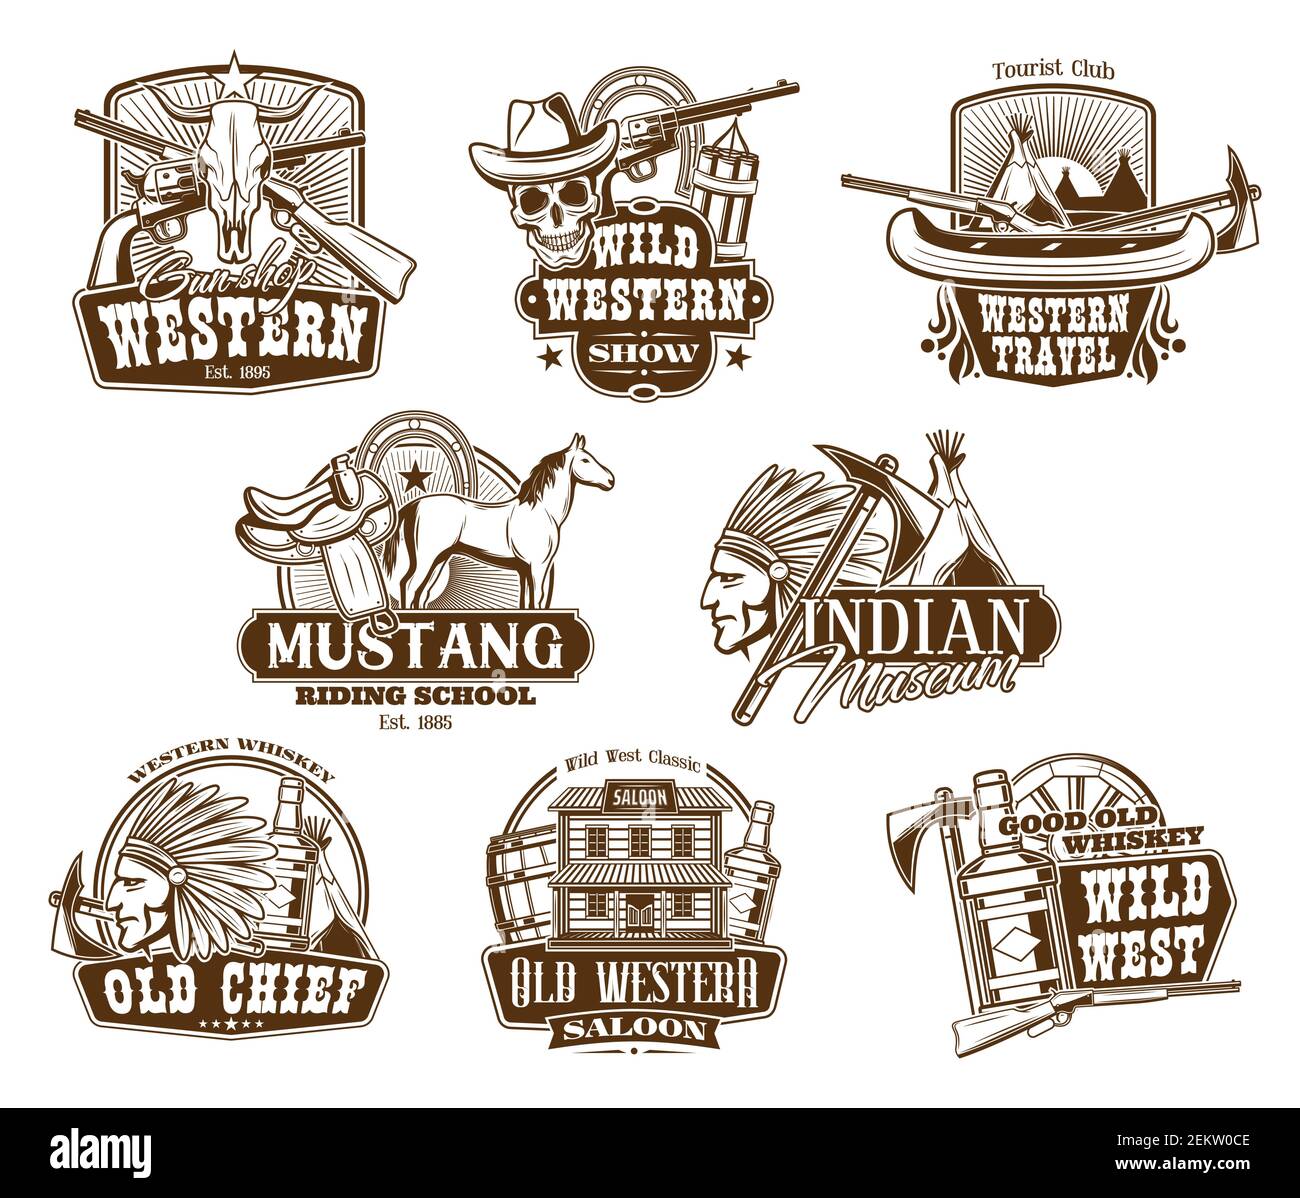 American Western icons, wild West show and rodeo riding school symbols. Vector Indigenous museum, Western travel club, whiskey bar saloon with longhor Stock Vector